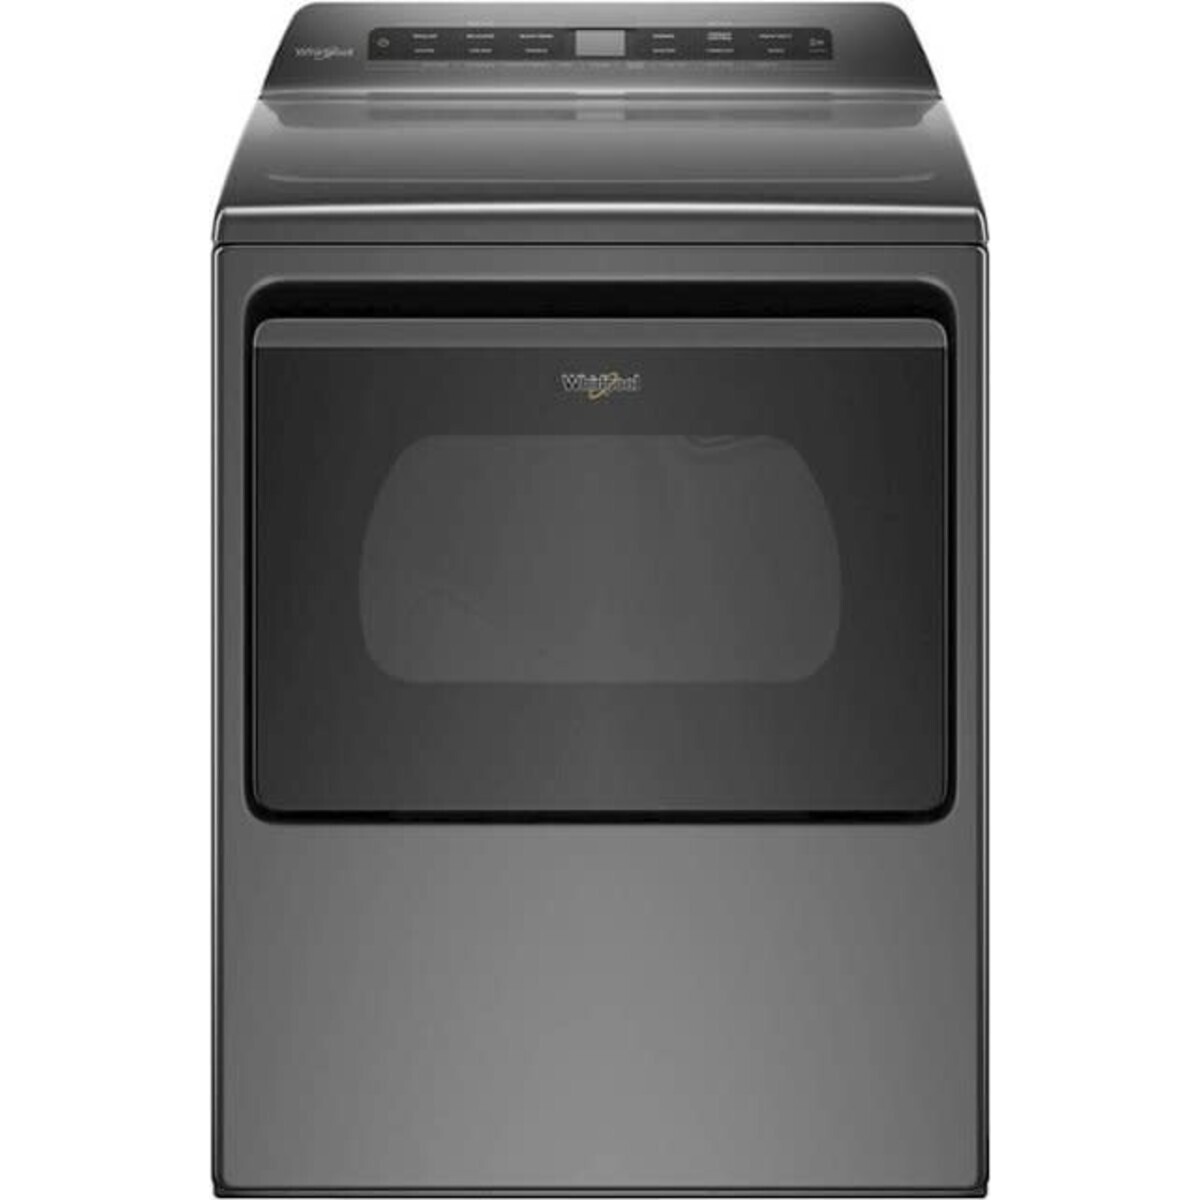 Whirlpool 7.4 cu. ft. Top Load Electric Dryer with Advanced Moisture Sensing